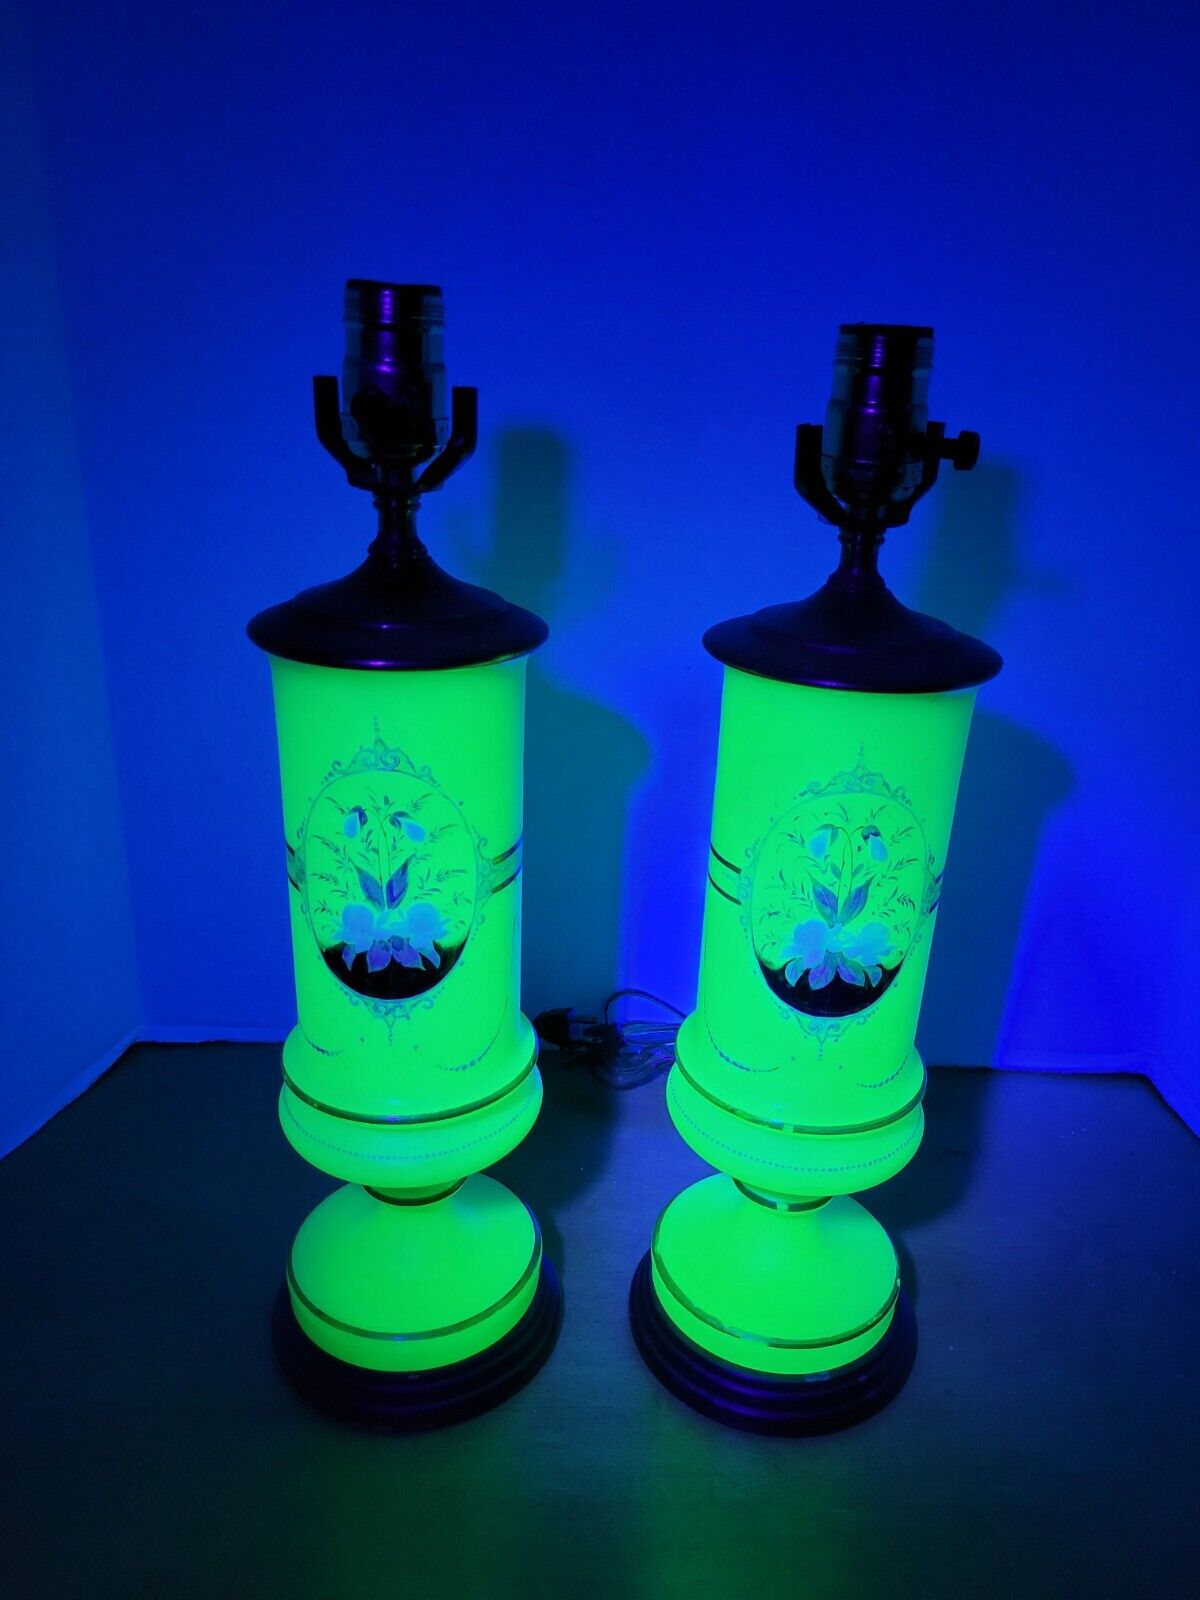 VTG 1930's Pair Uranium Glass Lamps Working Condition No Shades 